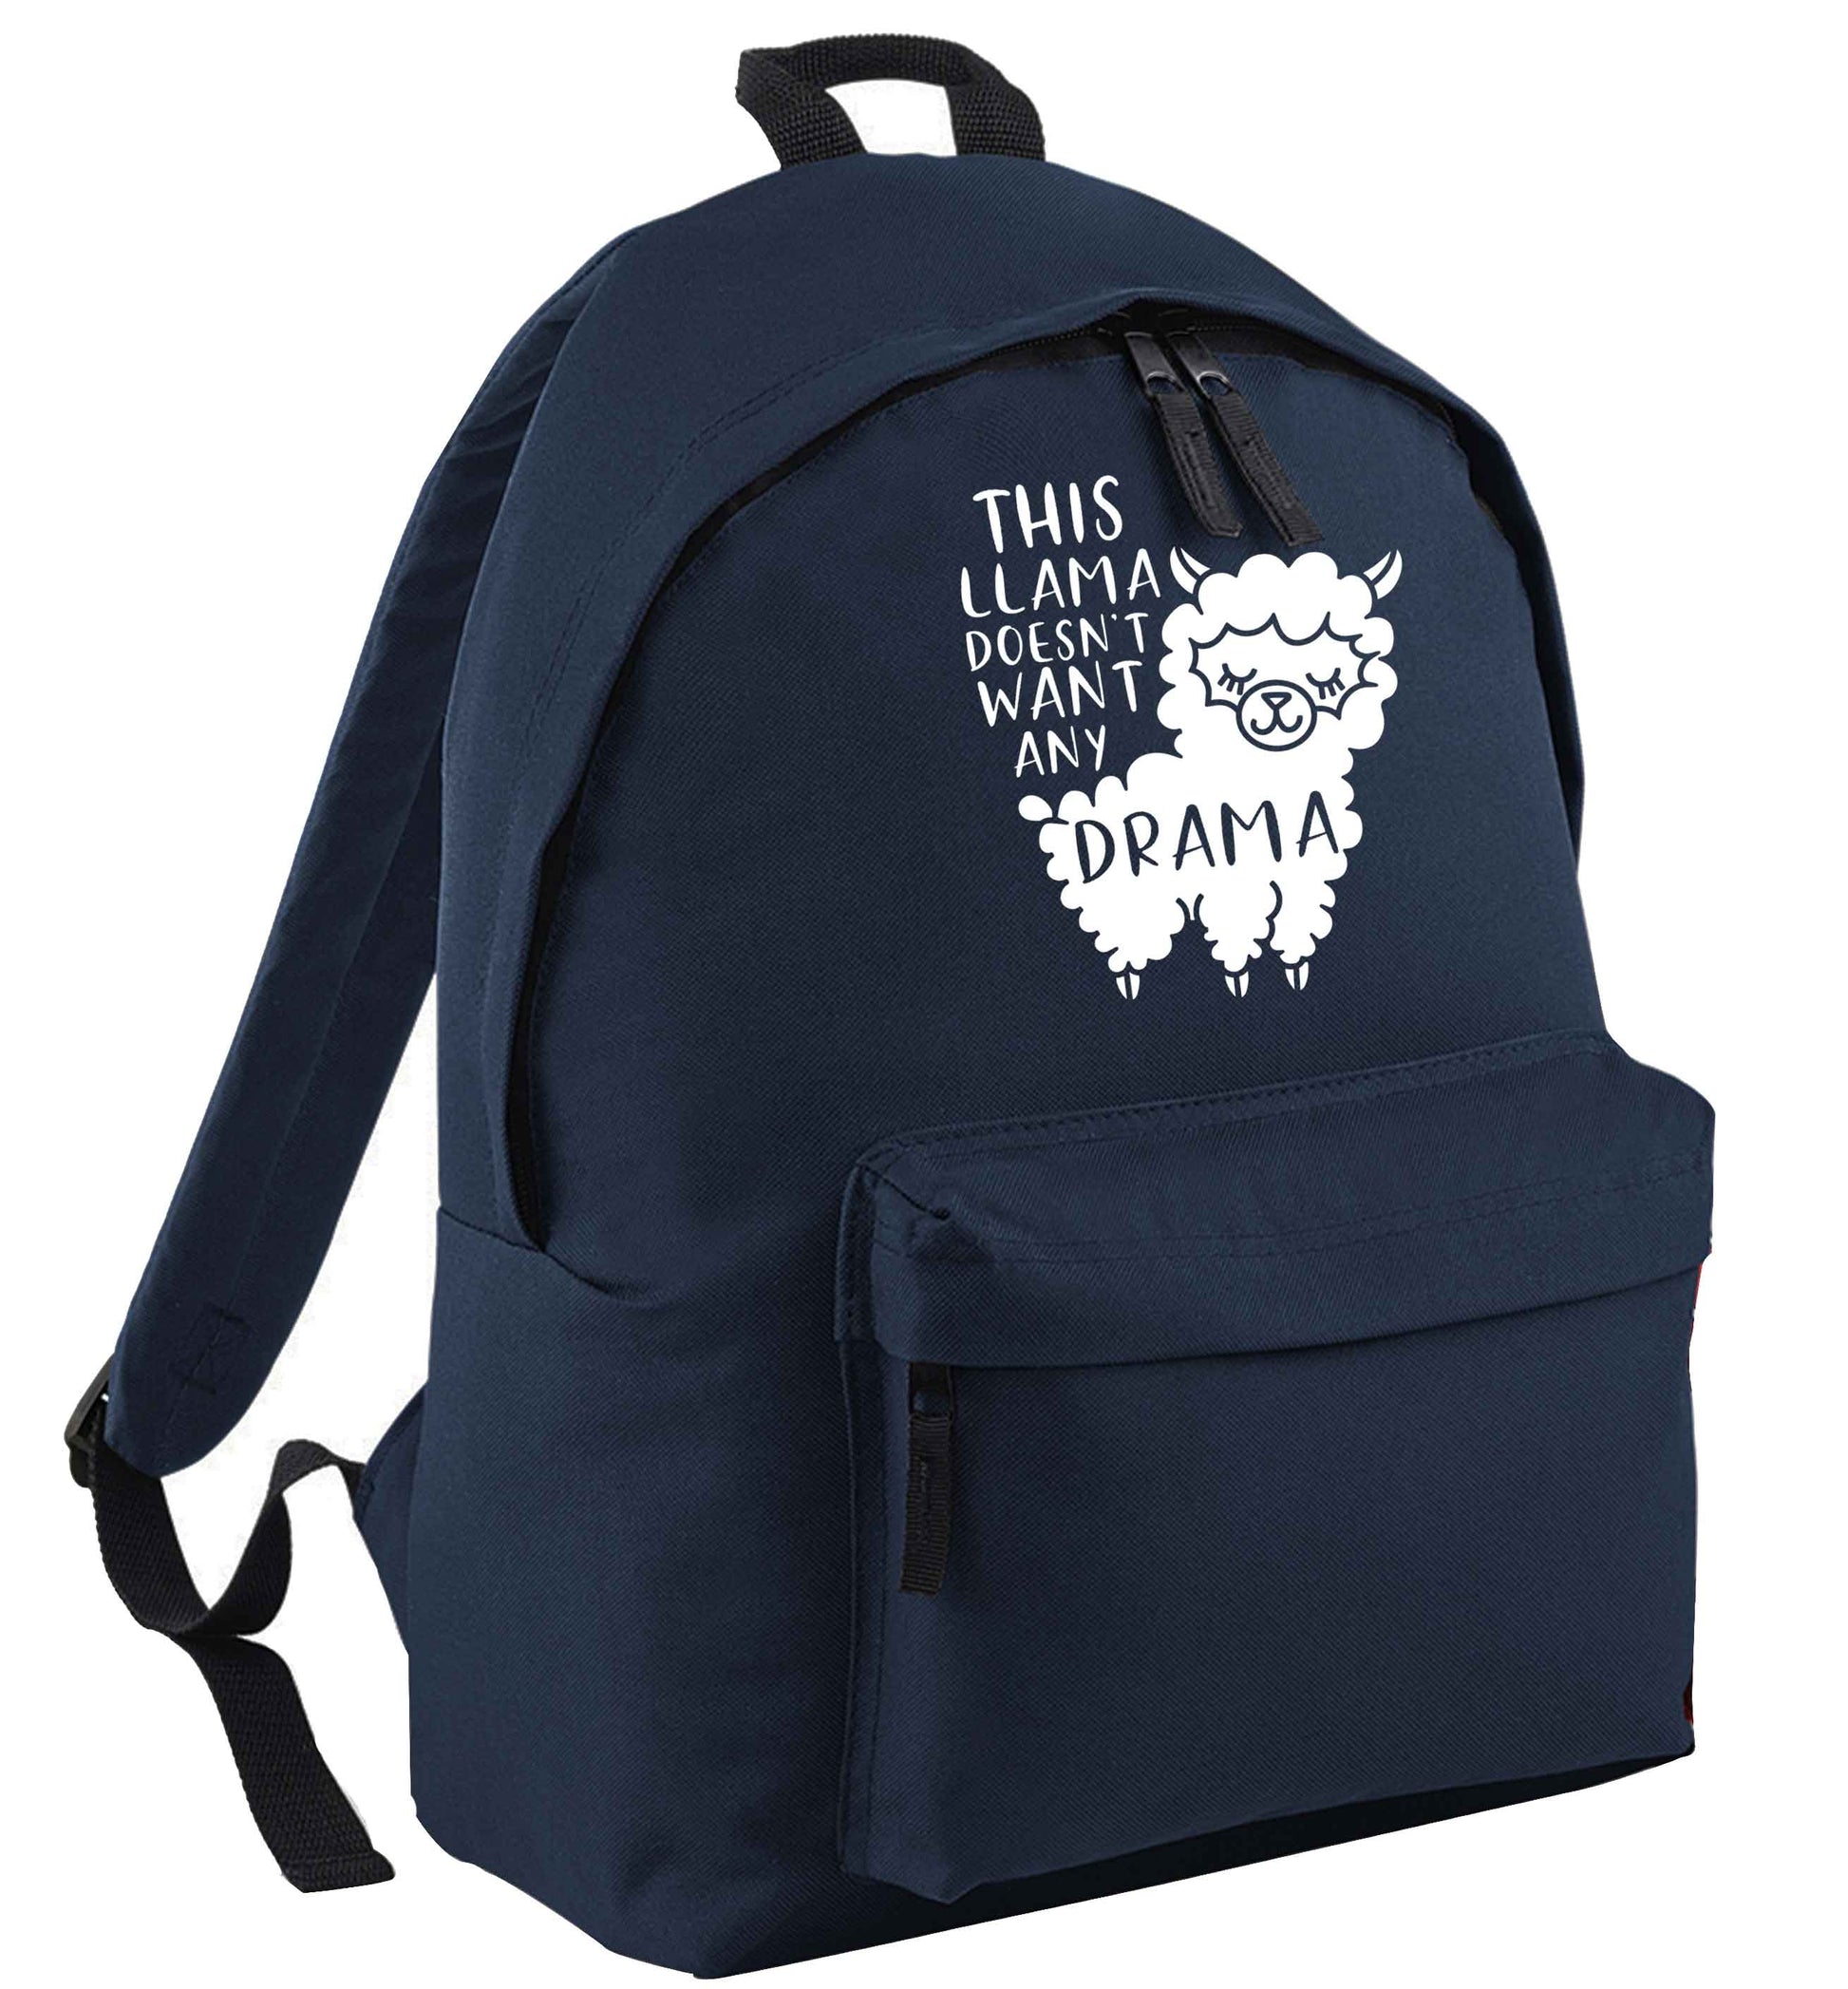 This Llama doesn't want any drama | Children's backpack